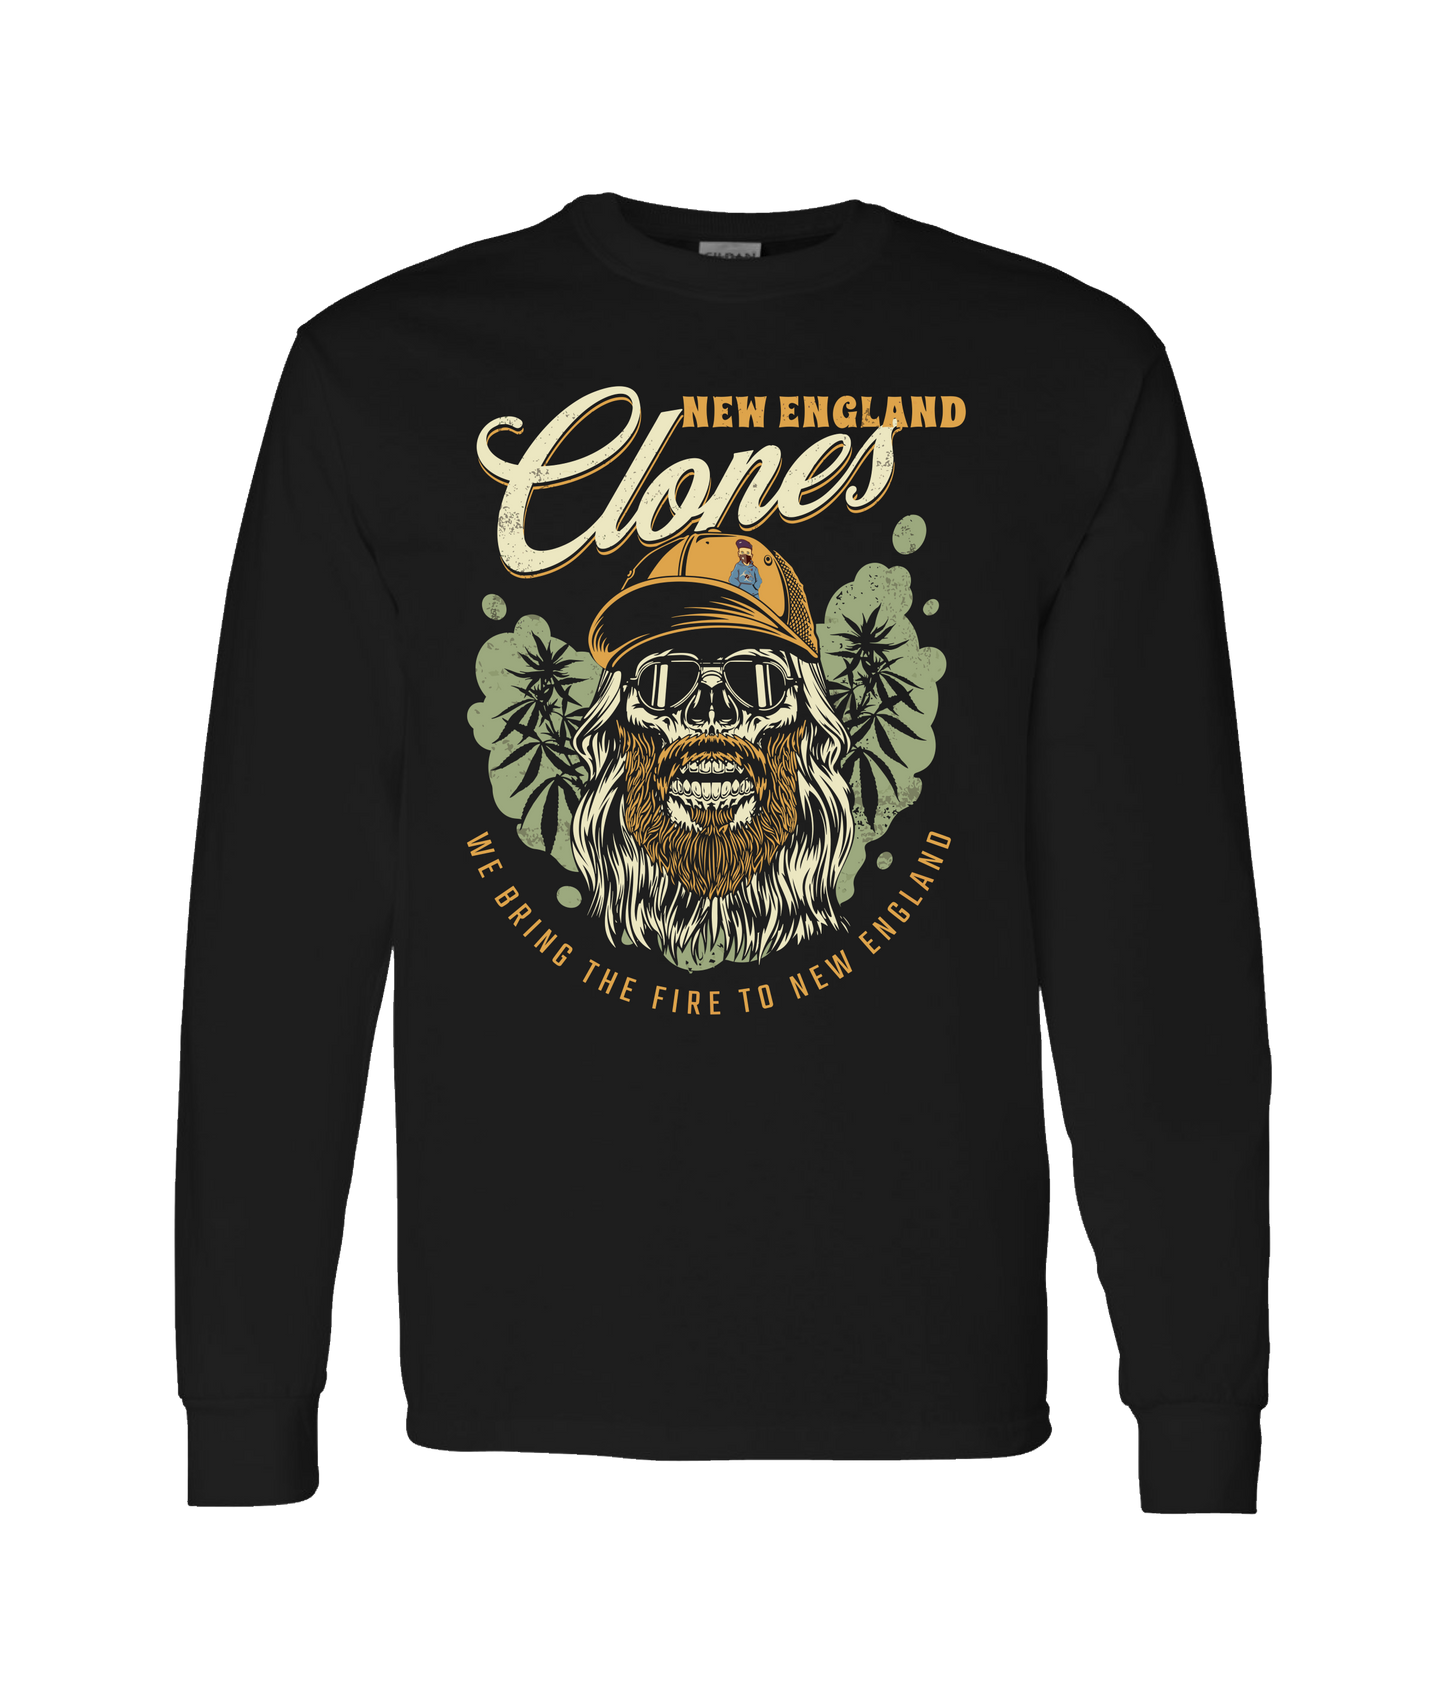 New England Clones - WE BRING THE FIRE - Black Long Sleeve T